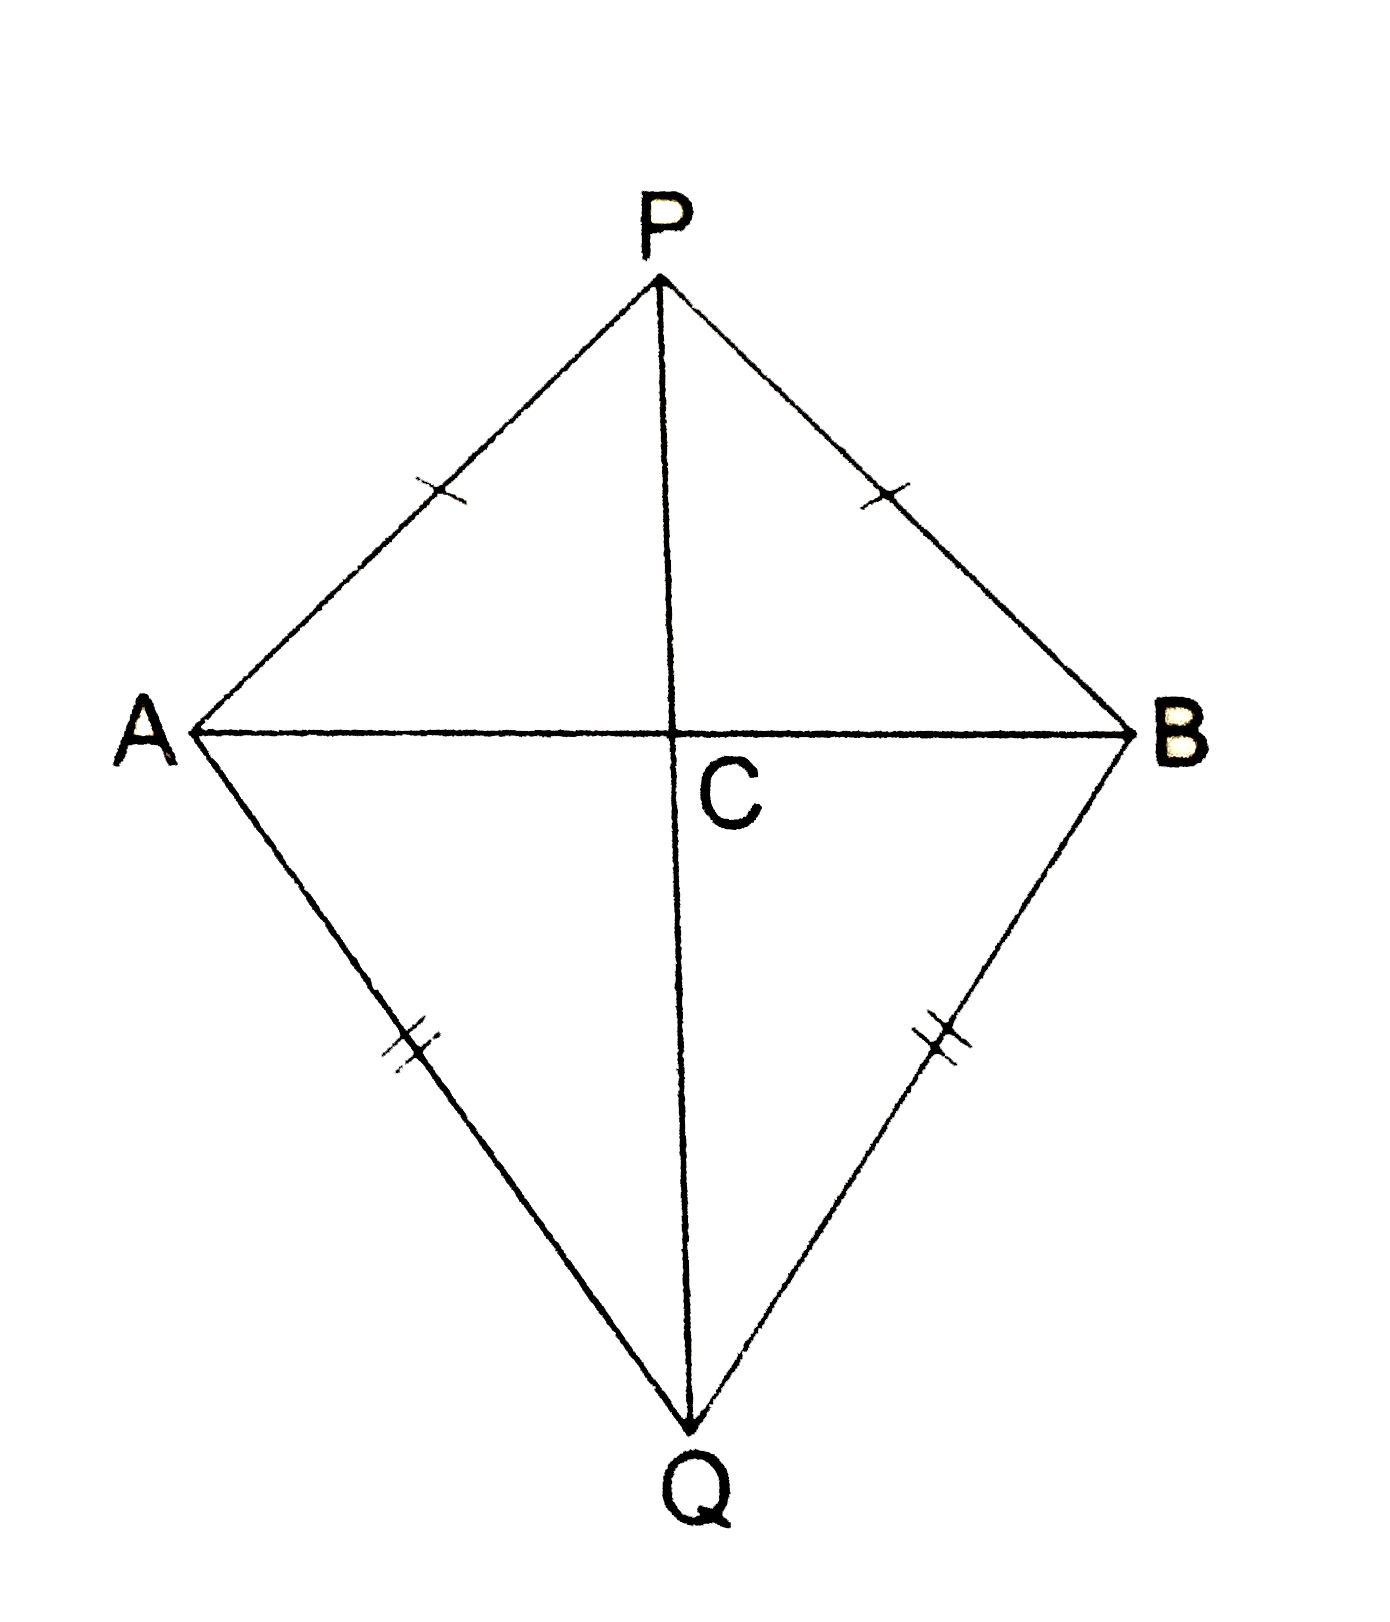 In the given figure, AB is a line segment. P and Q are points on opposite sides of AB such that each of them is equidistant from the points A and B. Show that the line PQ is the perpendicular bisector of AB.